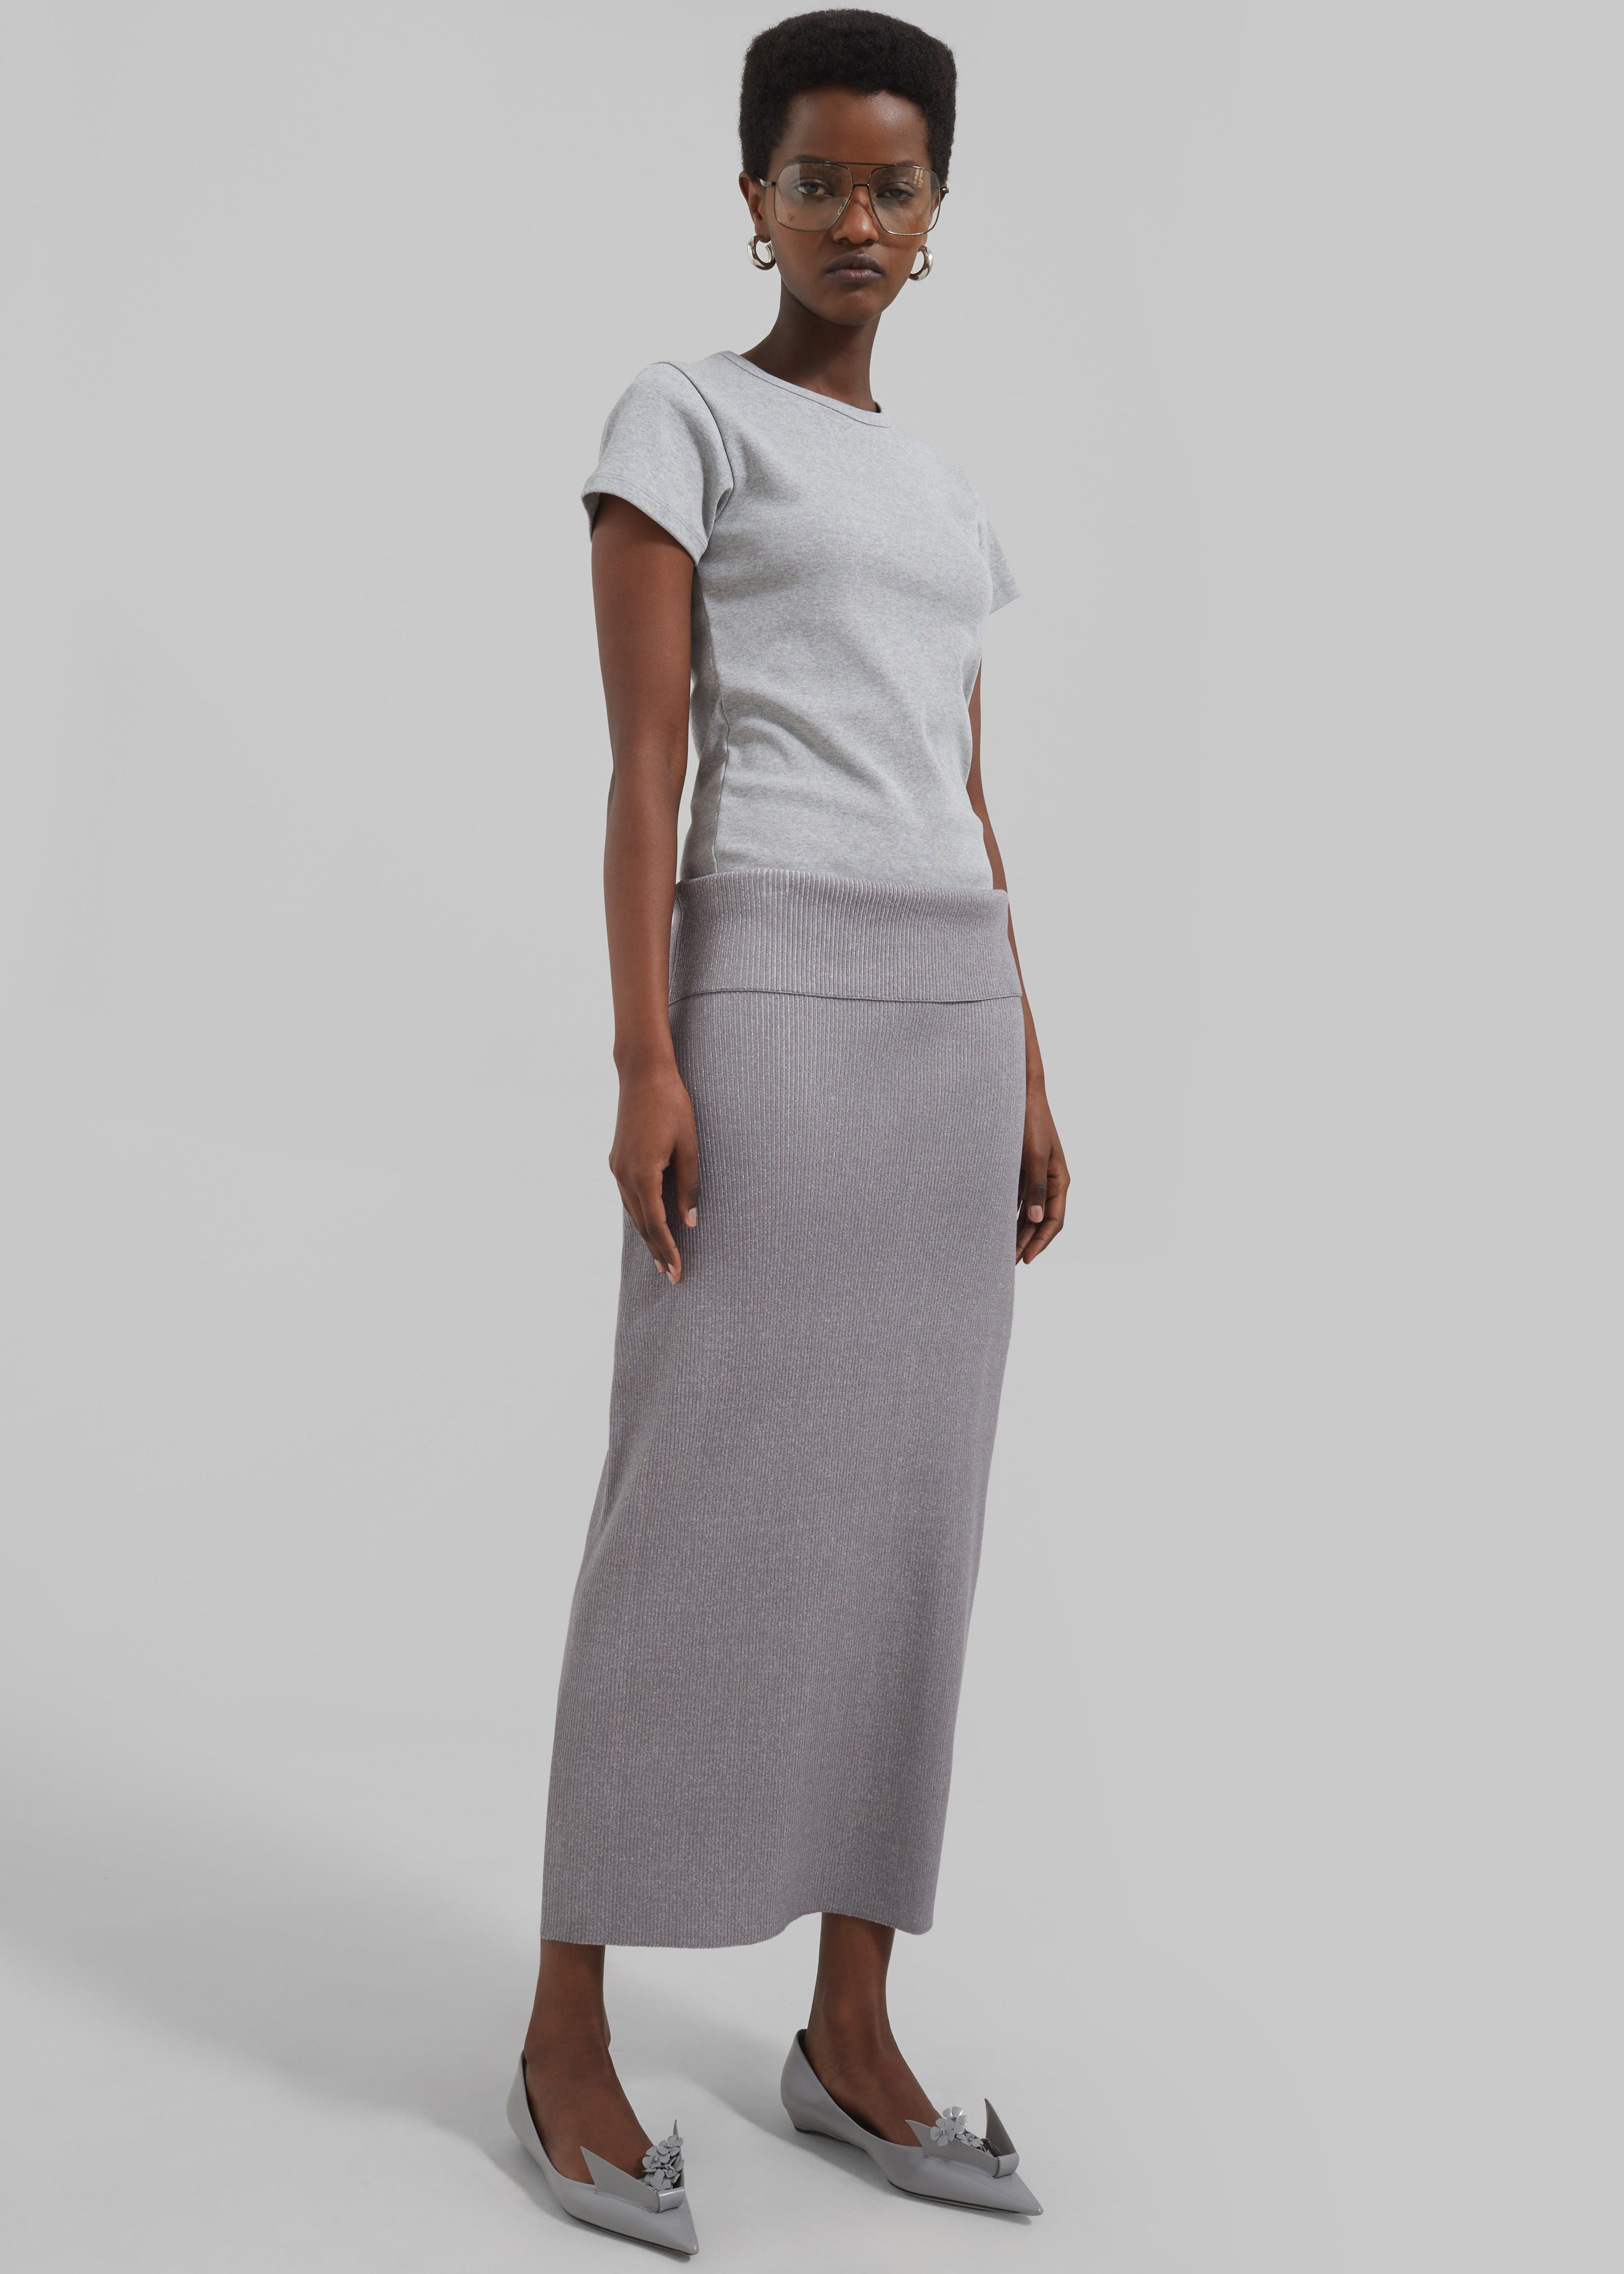 Proenza Schouler White Label Willow Skirt In Plaited Rib Knits - Fog/Off White - 2